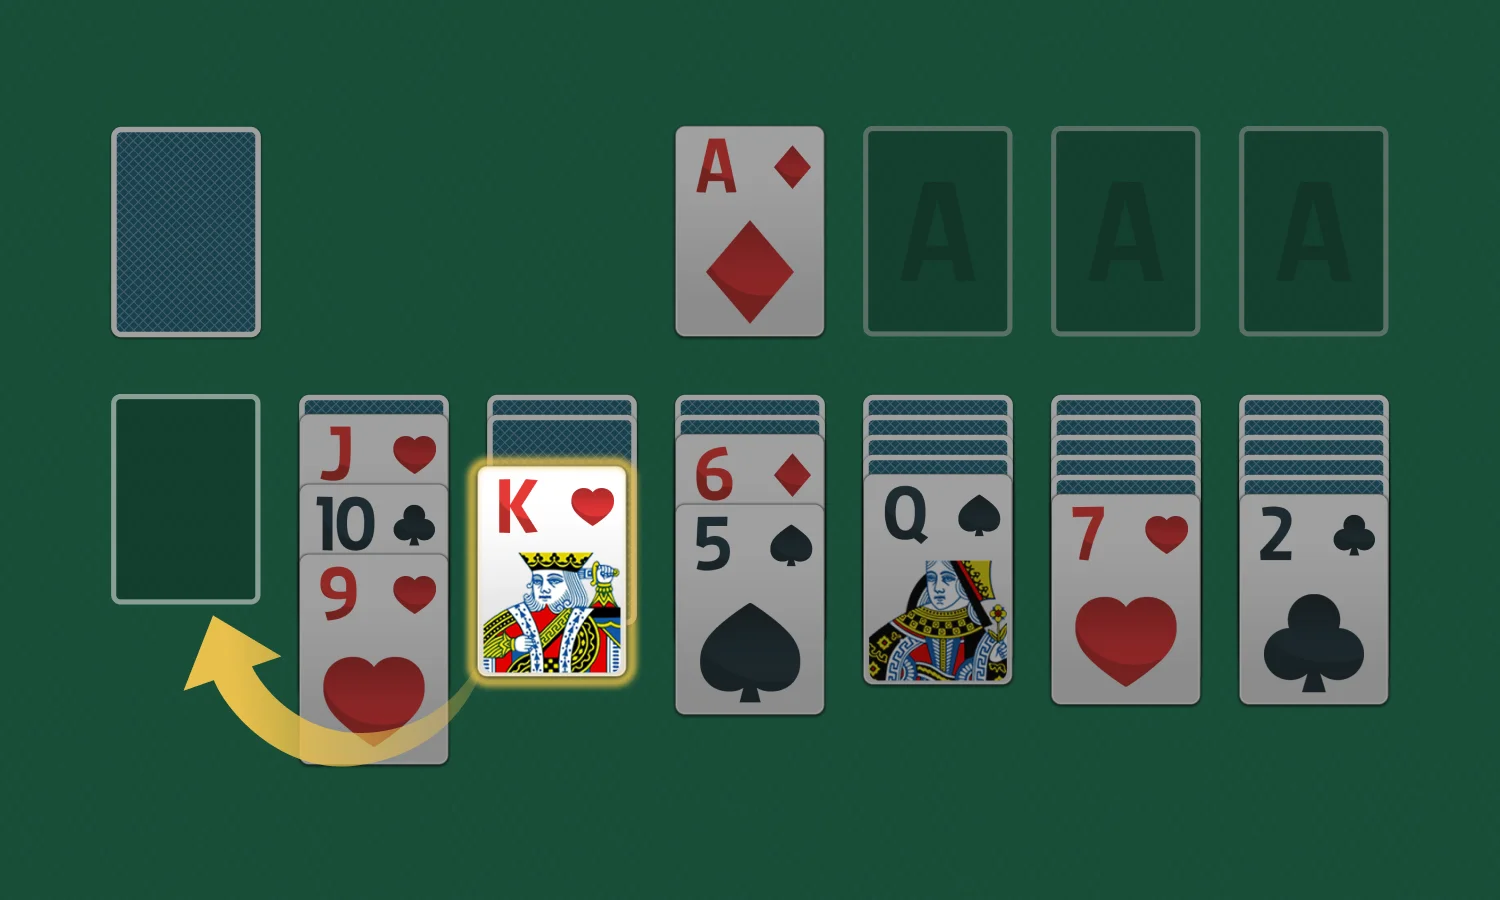 Solitaire Rules: Fill an Empty Tableau